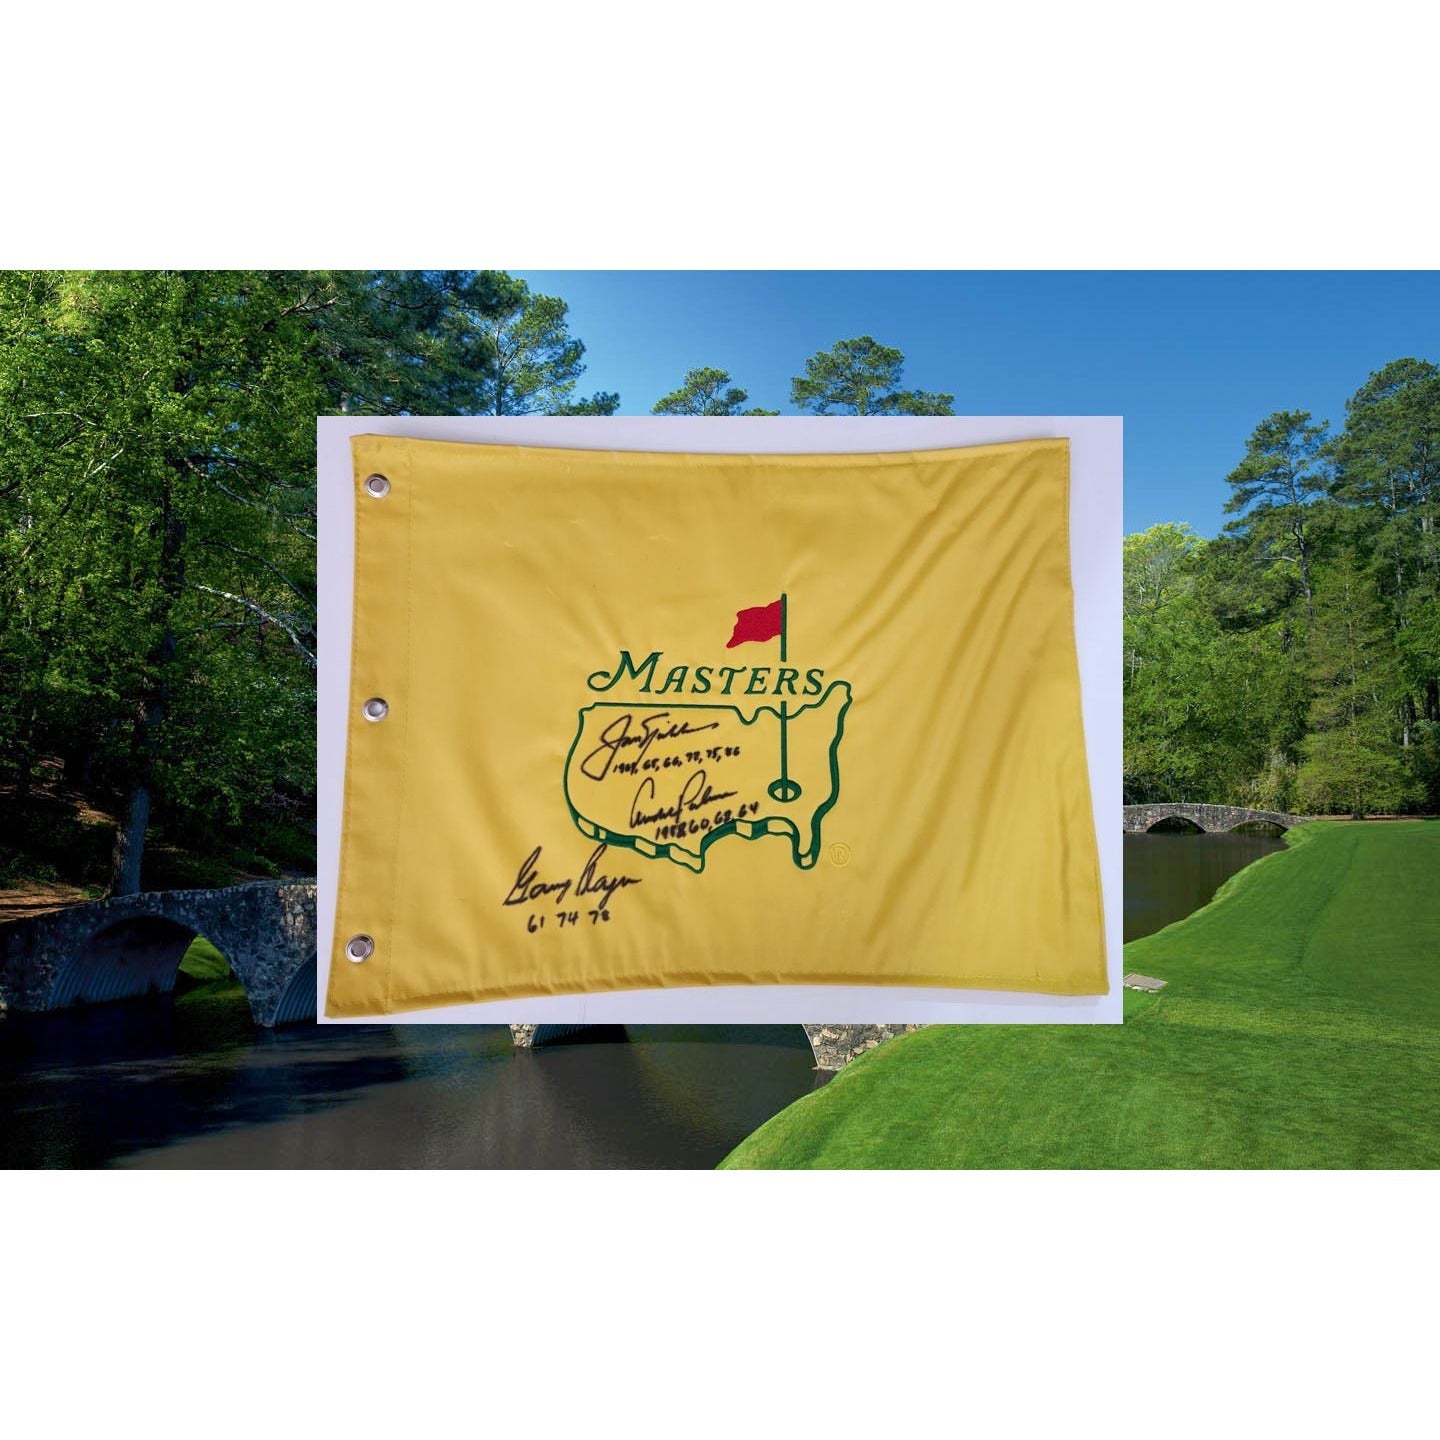 Jack Nichlaus Arnold Palmer Gary Player Masters Golf pin flag signed with proof